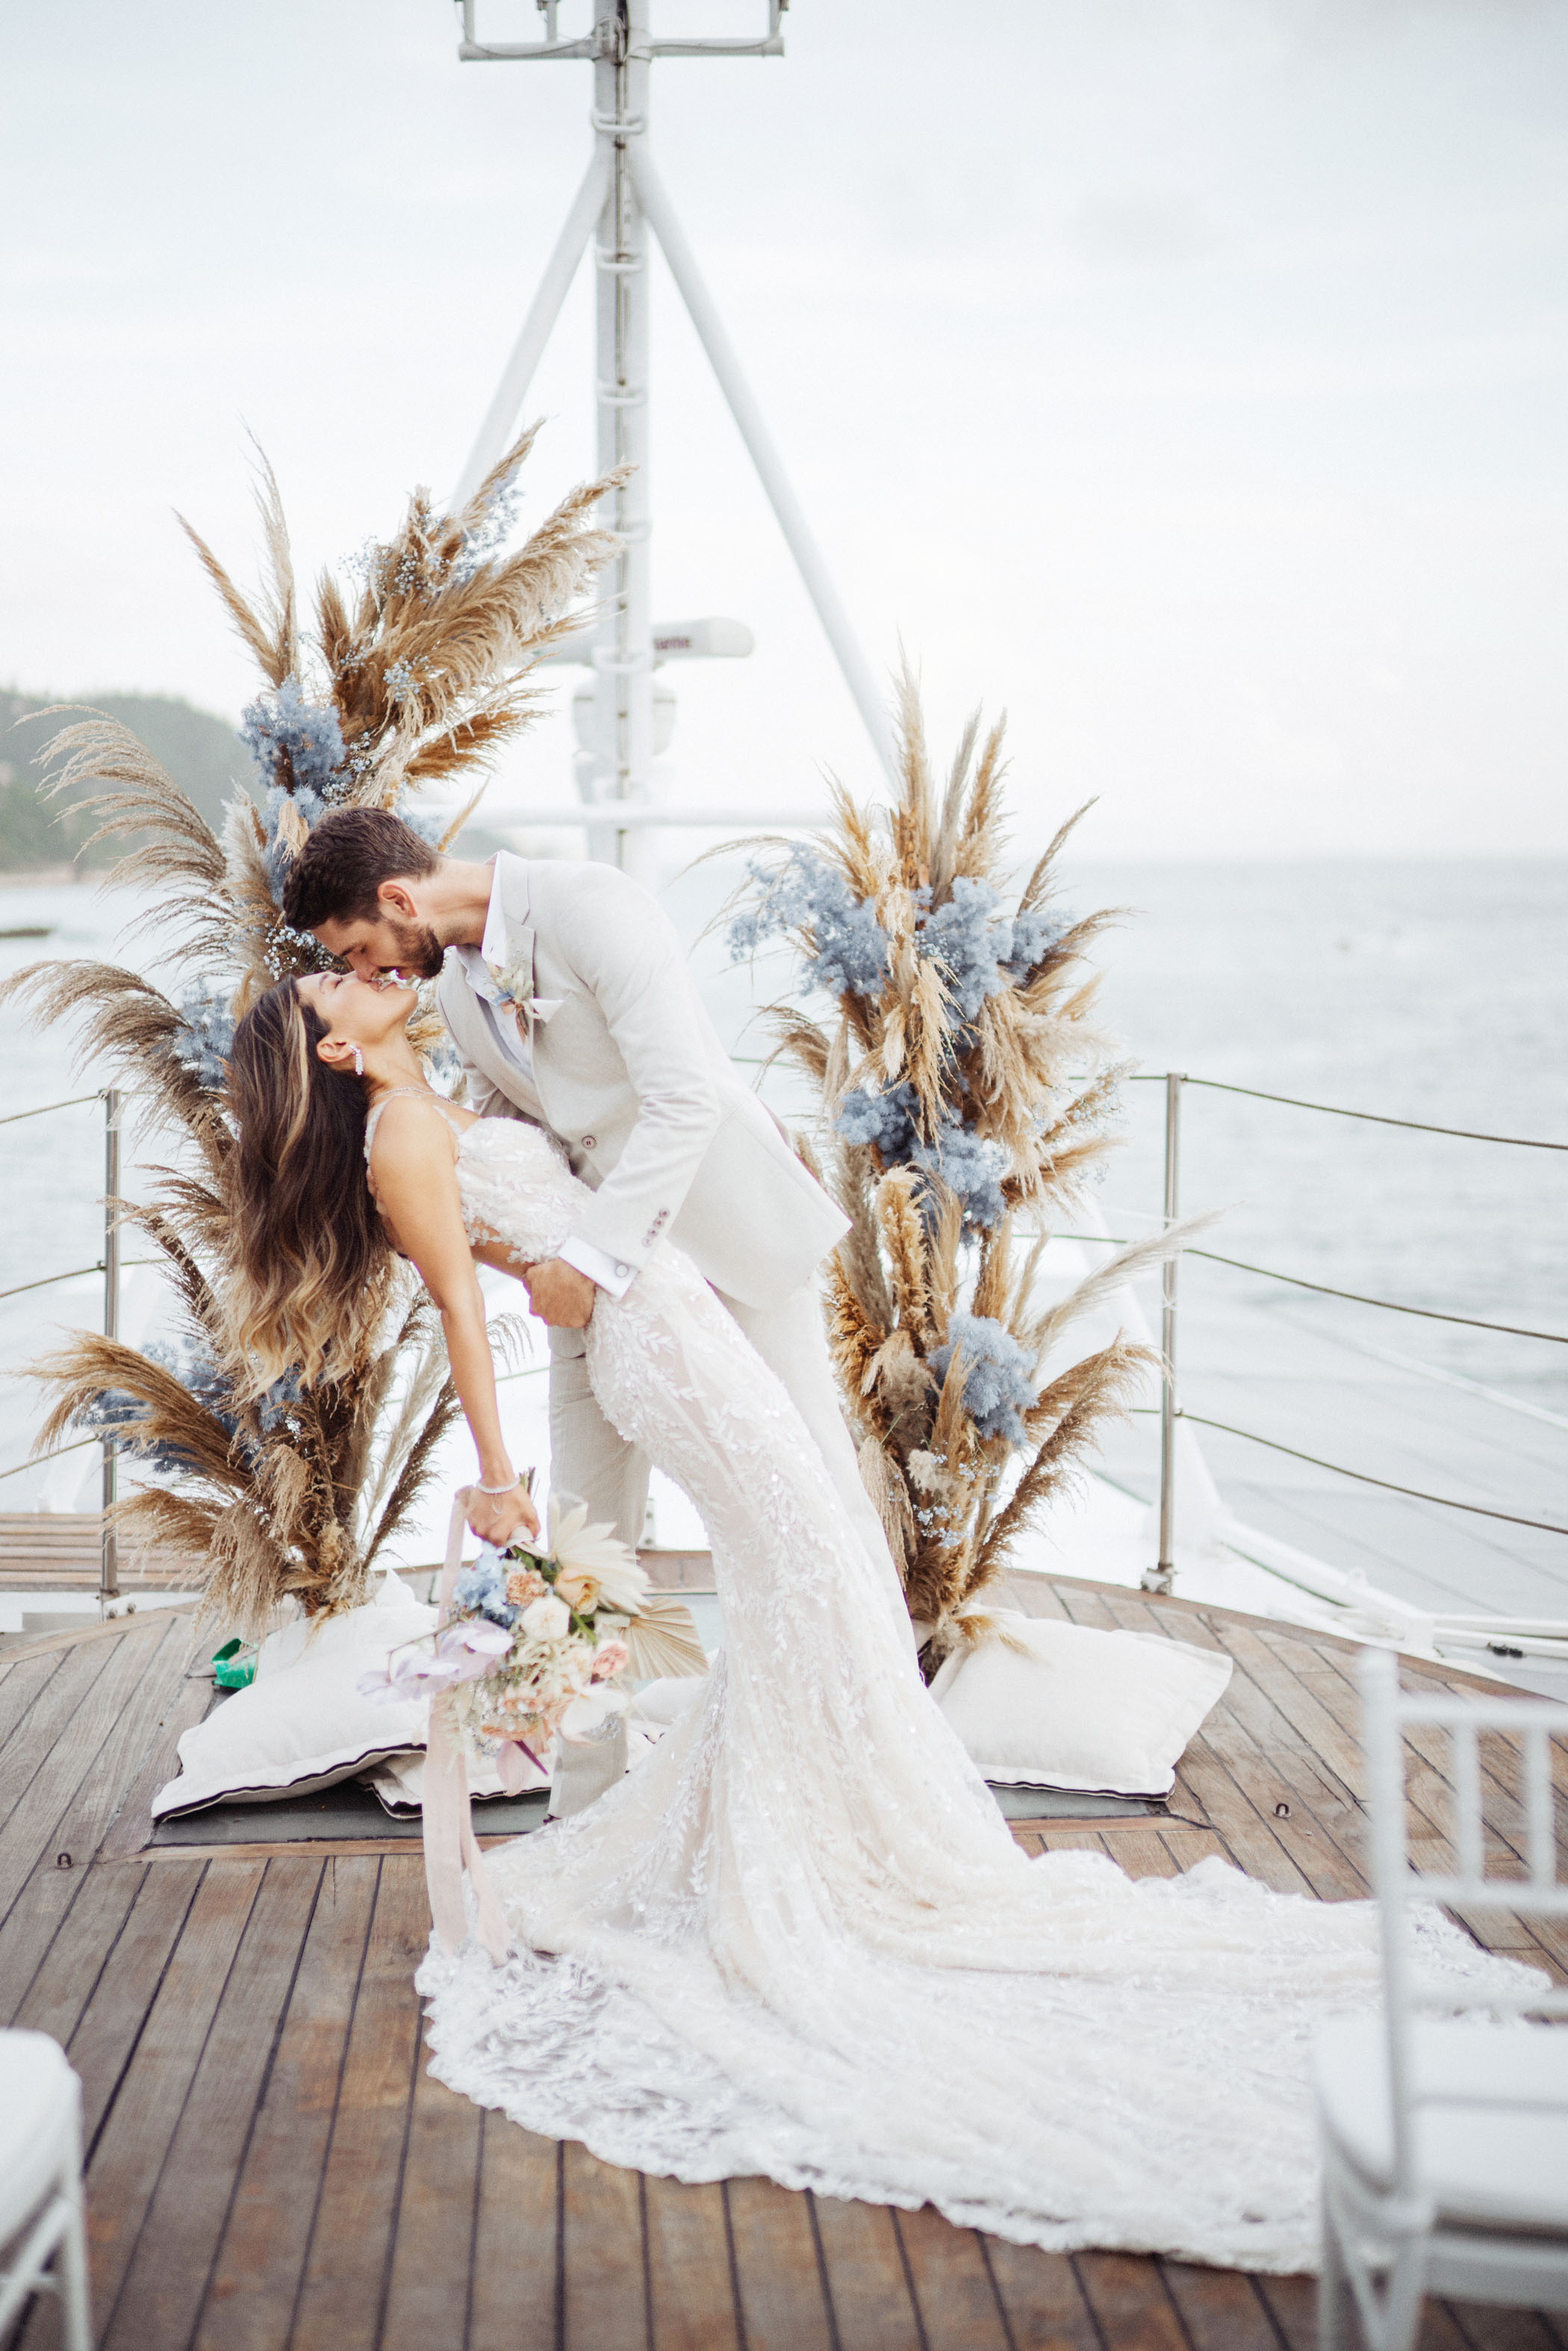 Bride and groom getting first kiss on boat